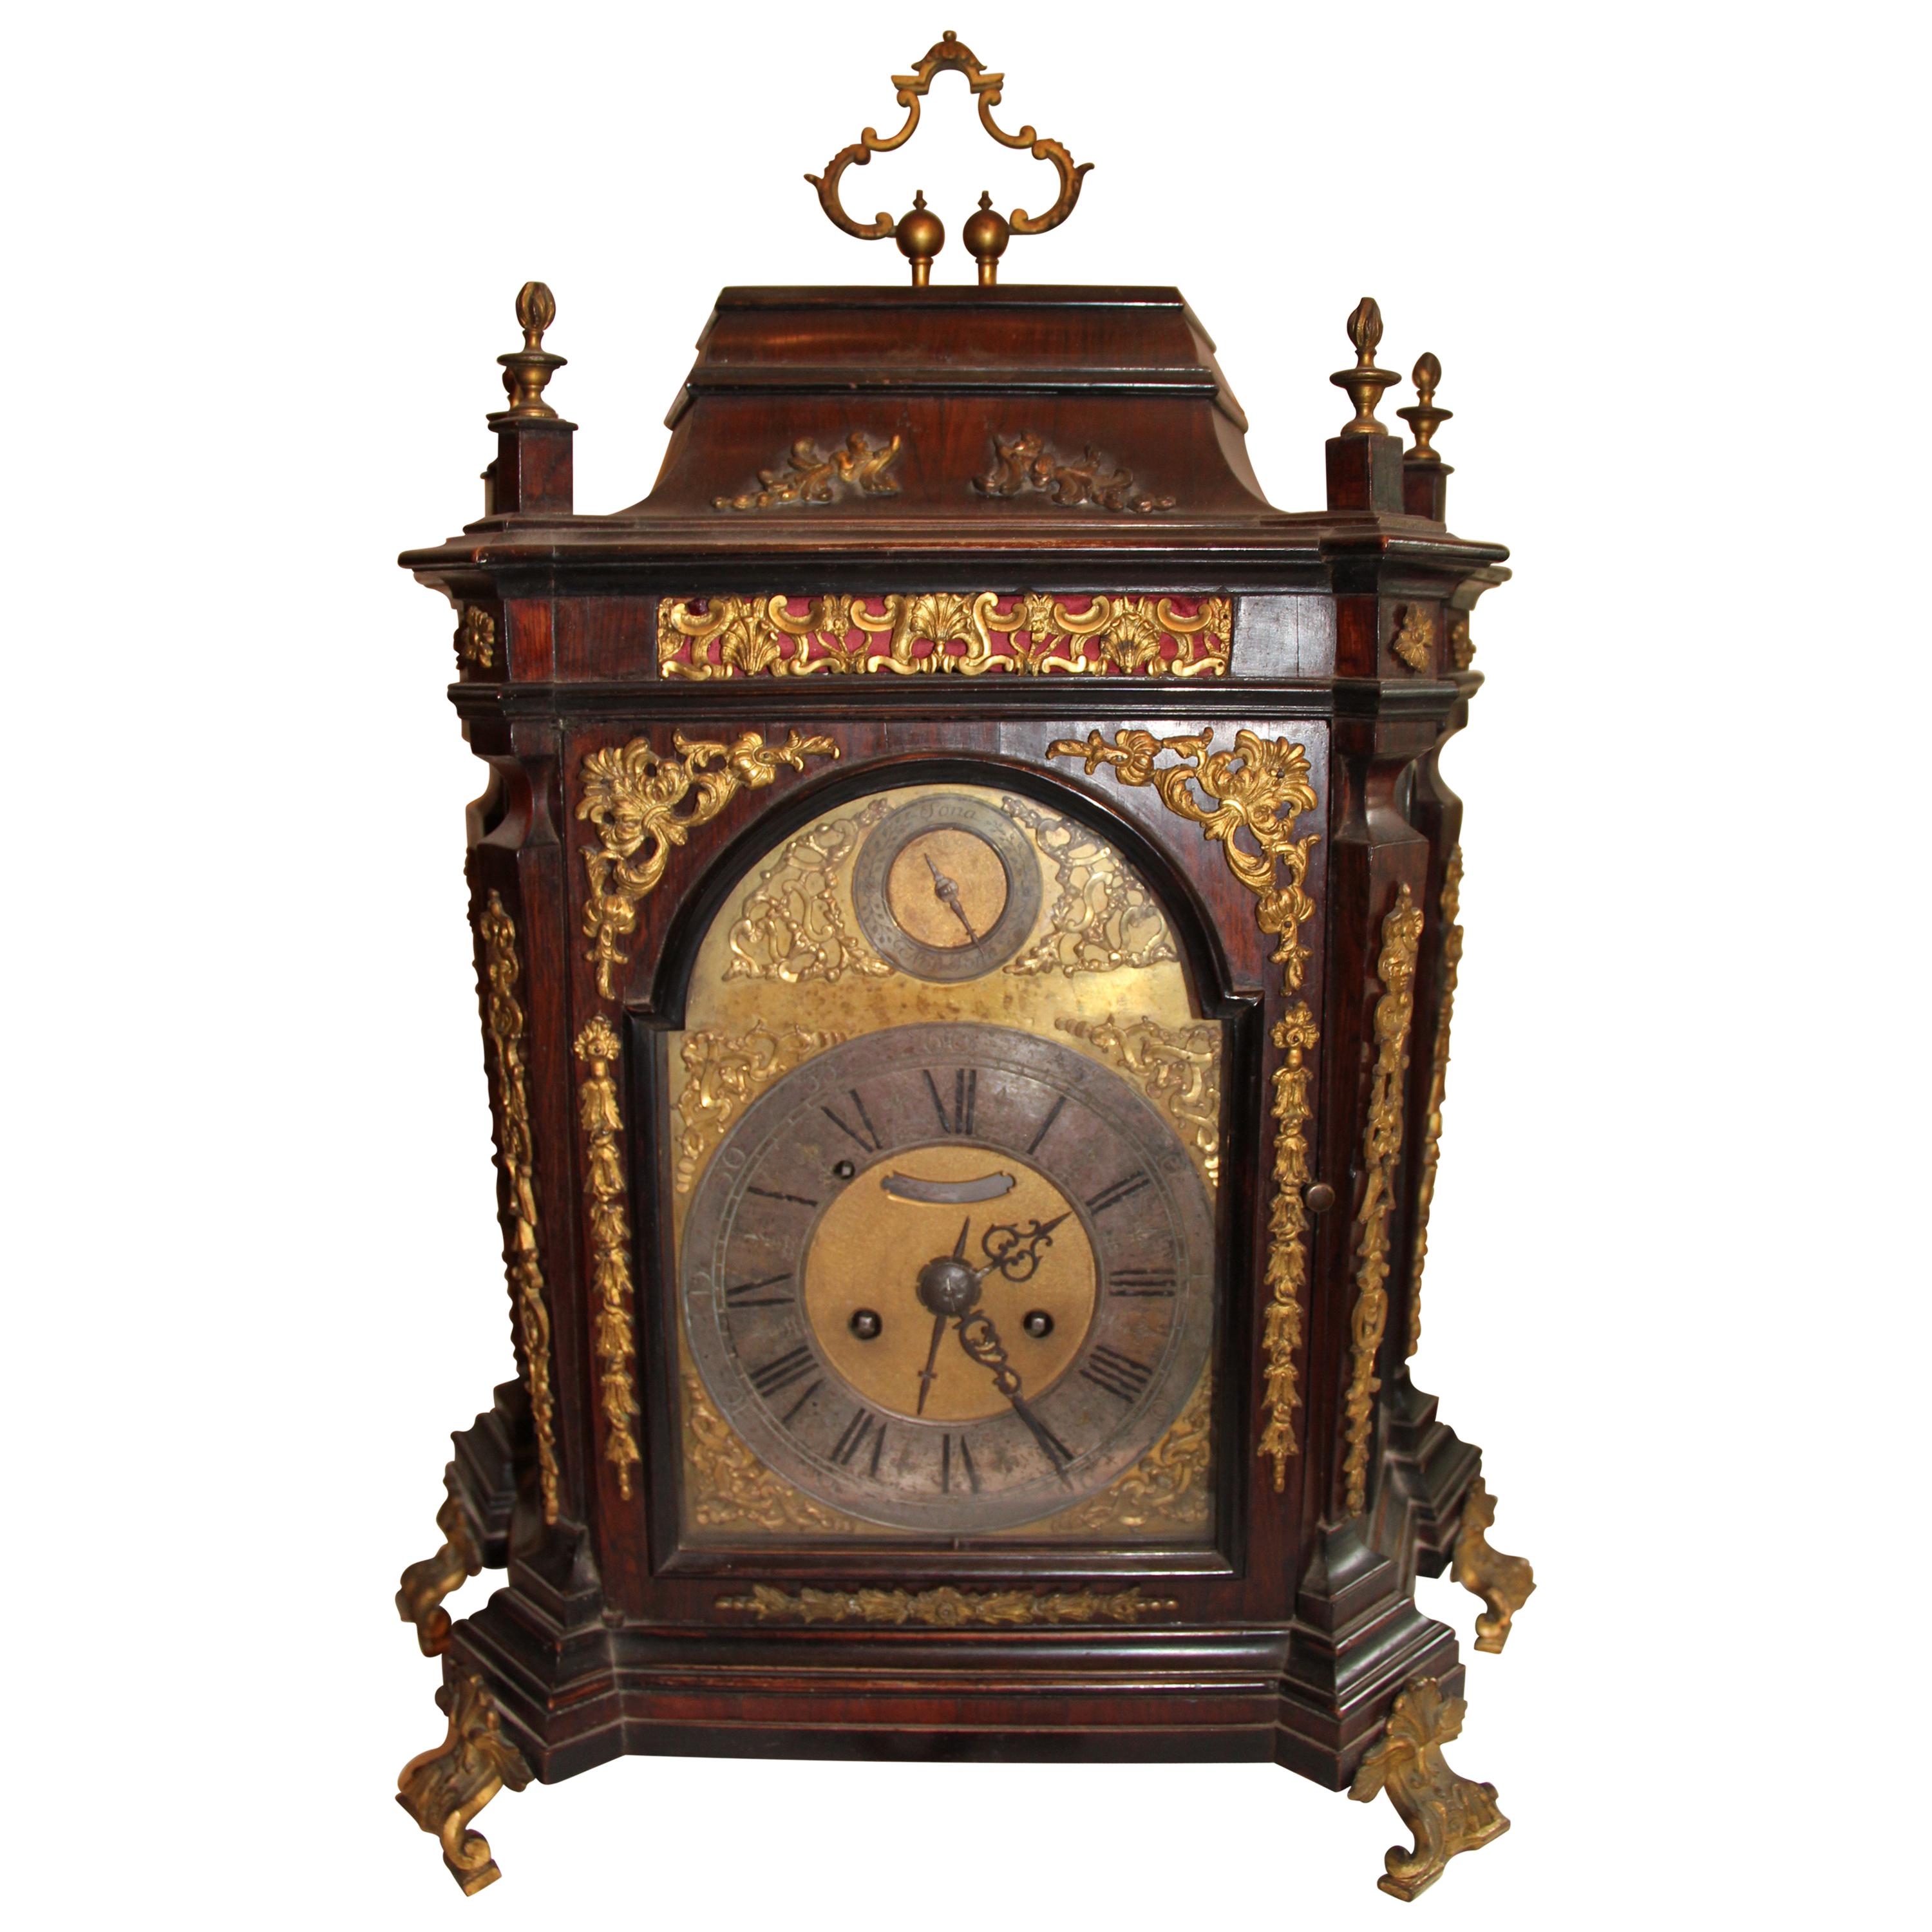 Villacroce Clock 18th Century with Rosewood Veneer and Ebonized Wood